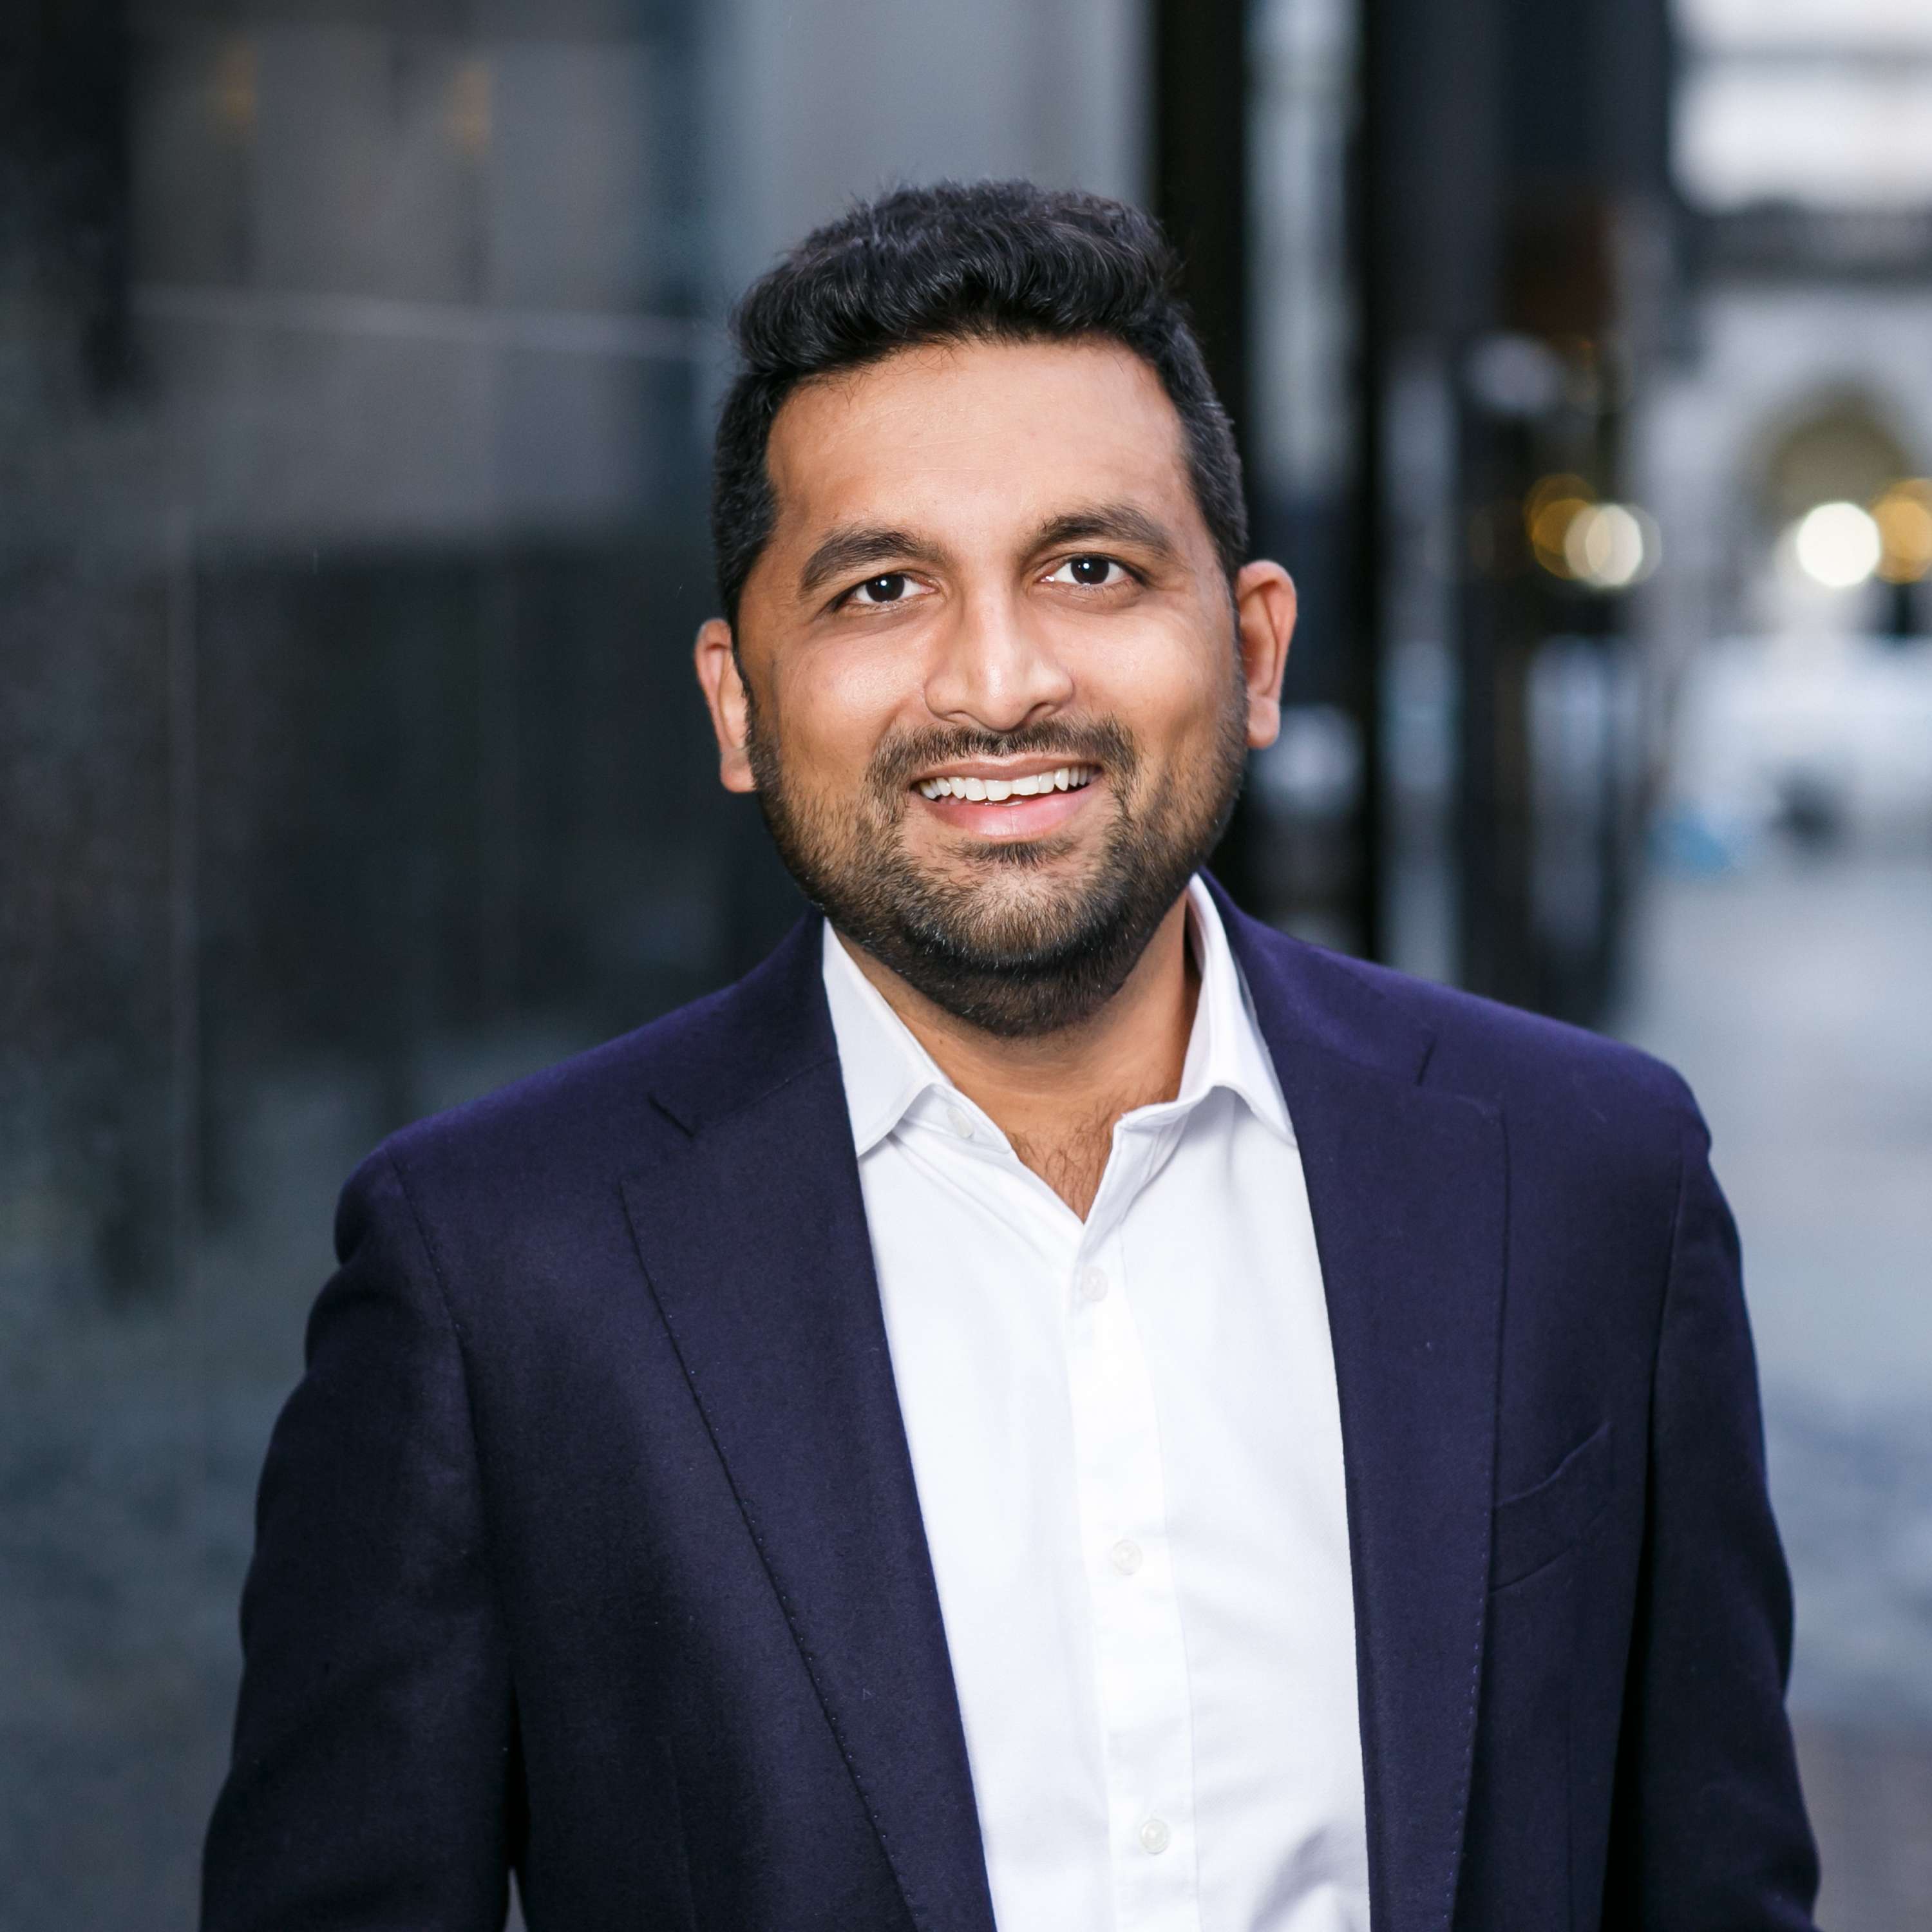 Business loans smooth and smart with founder and CEO of Nucleus Commercial Finance, Chirag Shah (UK)